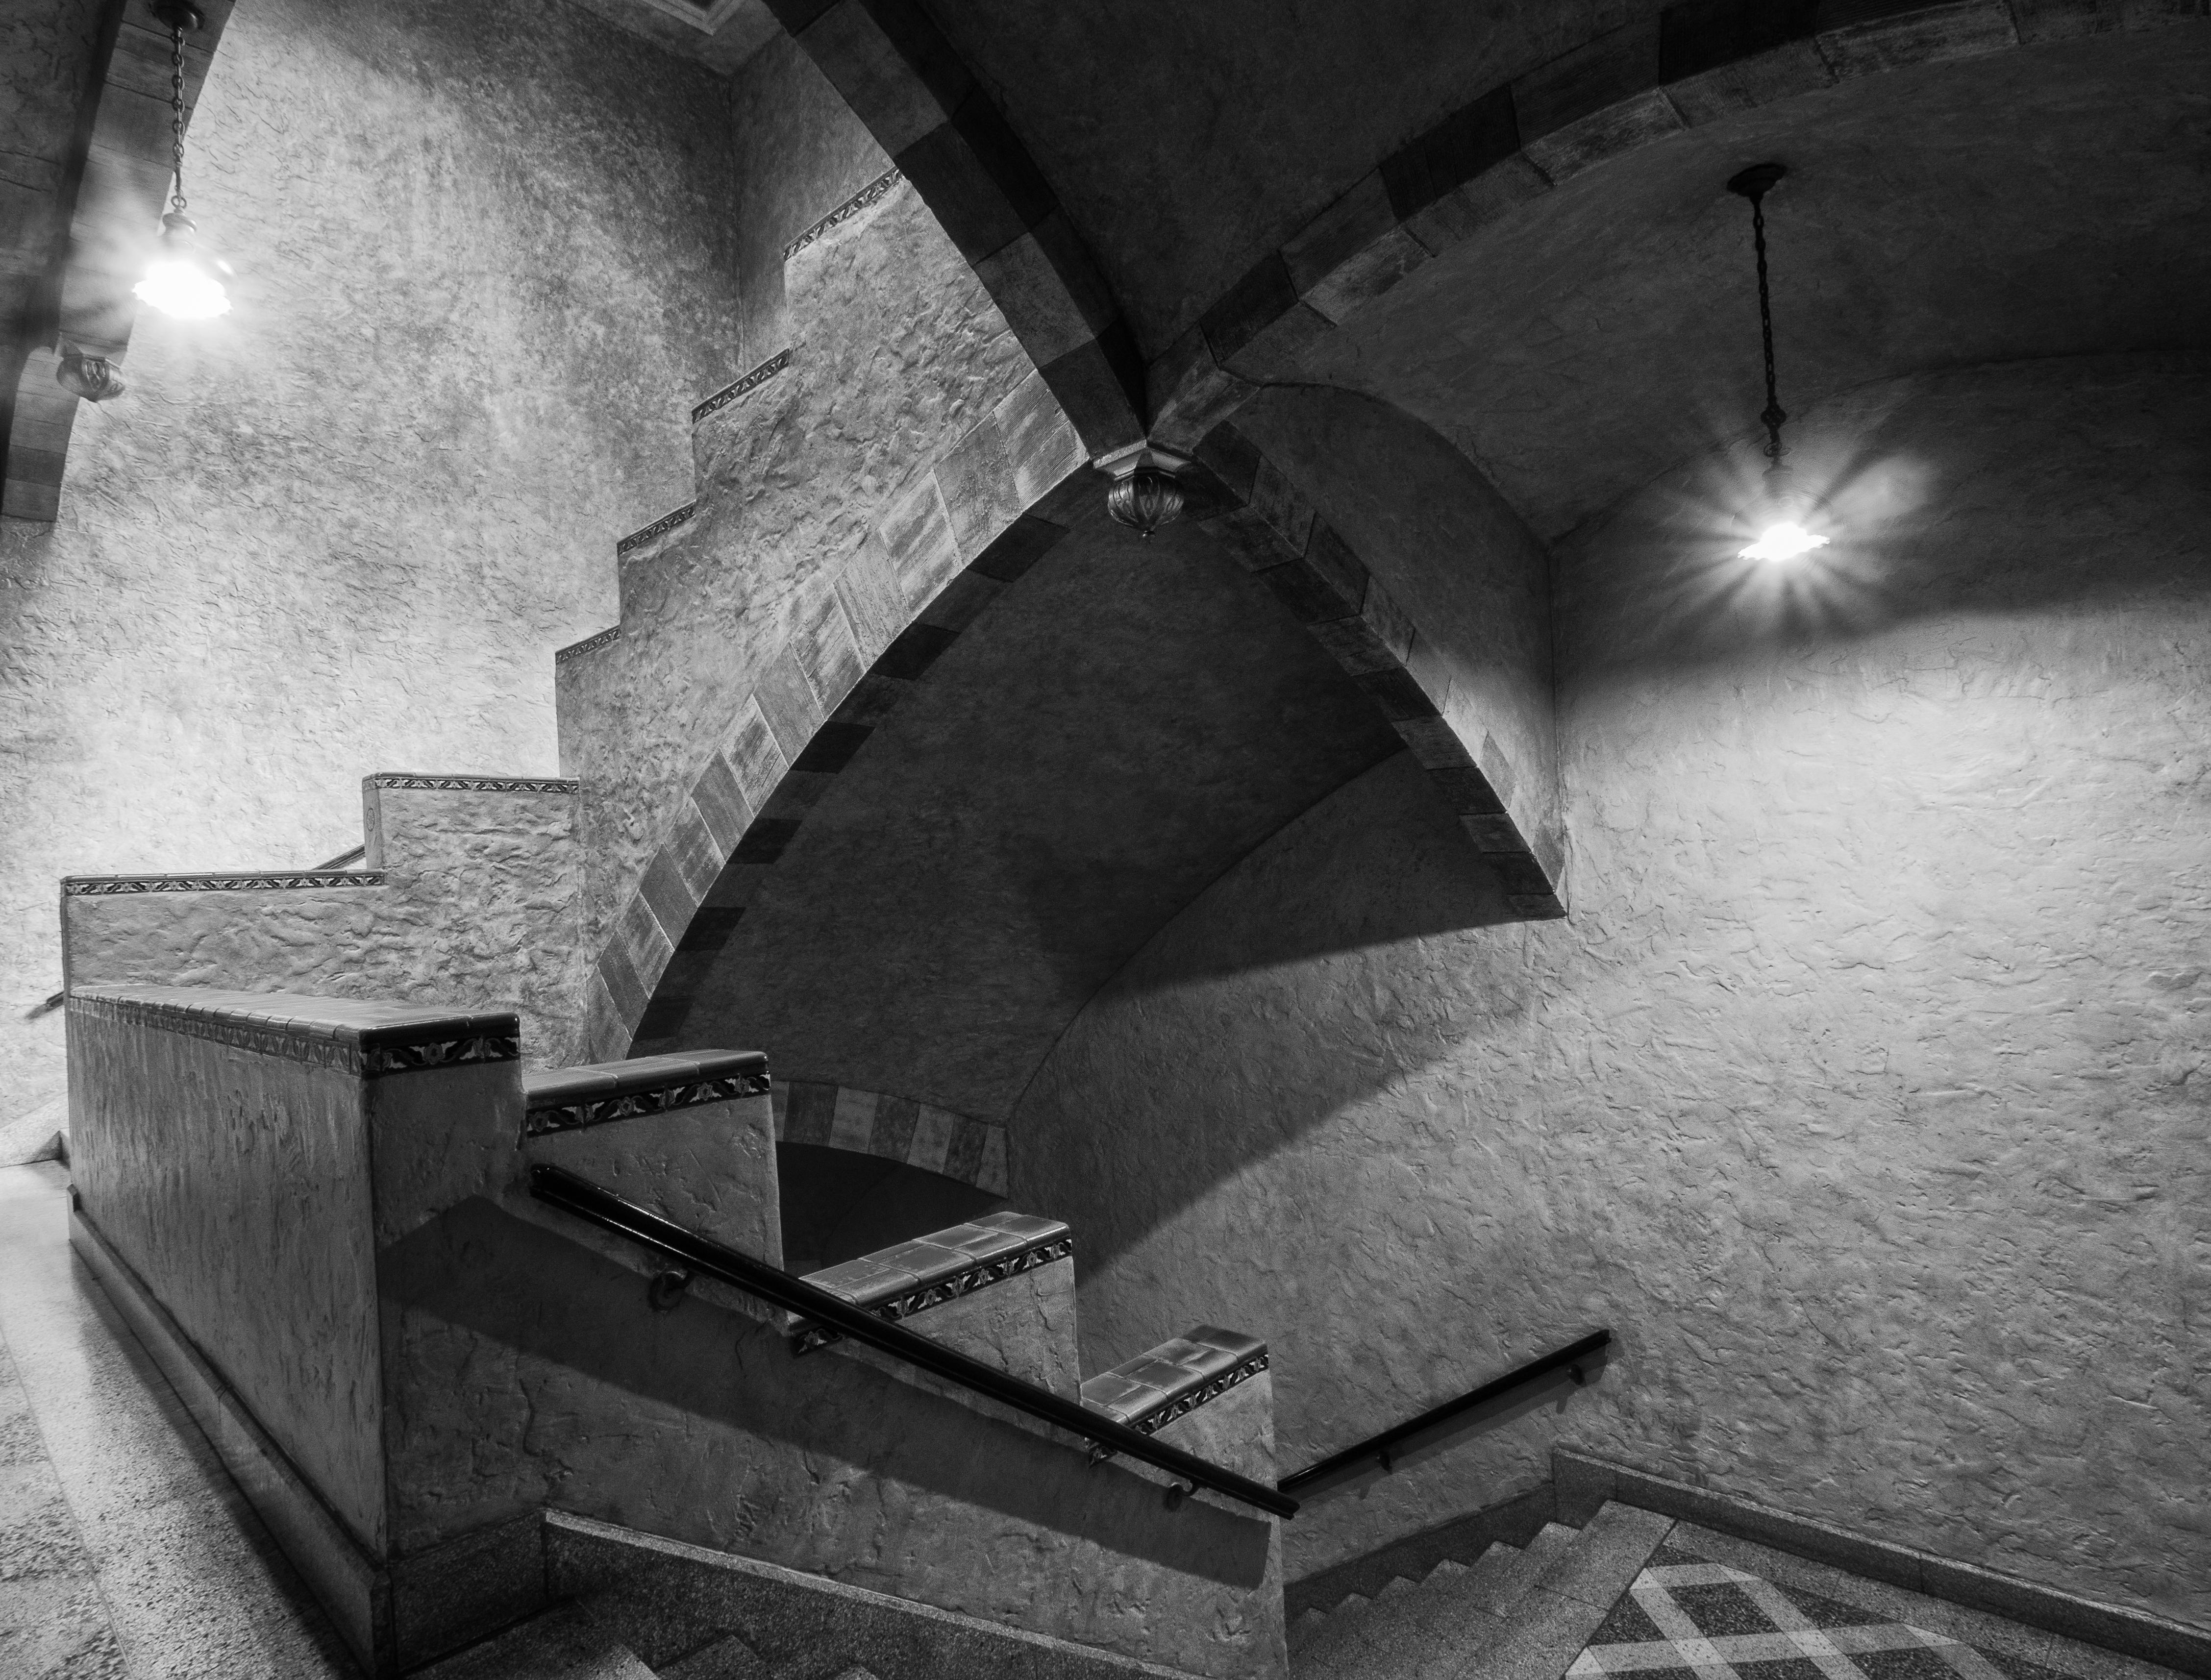 Myrtie Cope Black and White Photograph - "Fox Theatre, Ballroom Stairwell" - architectural photography - Ezra Stoller